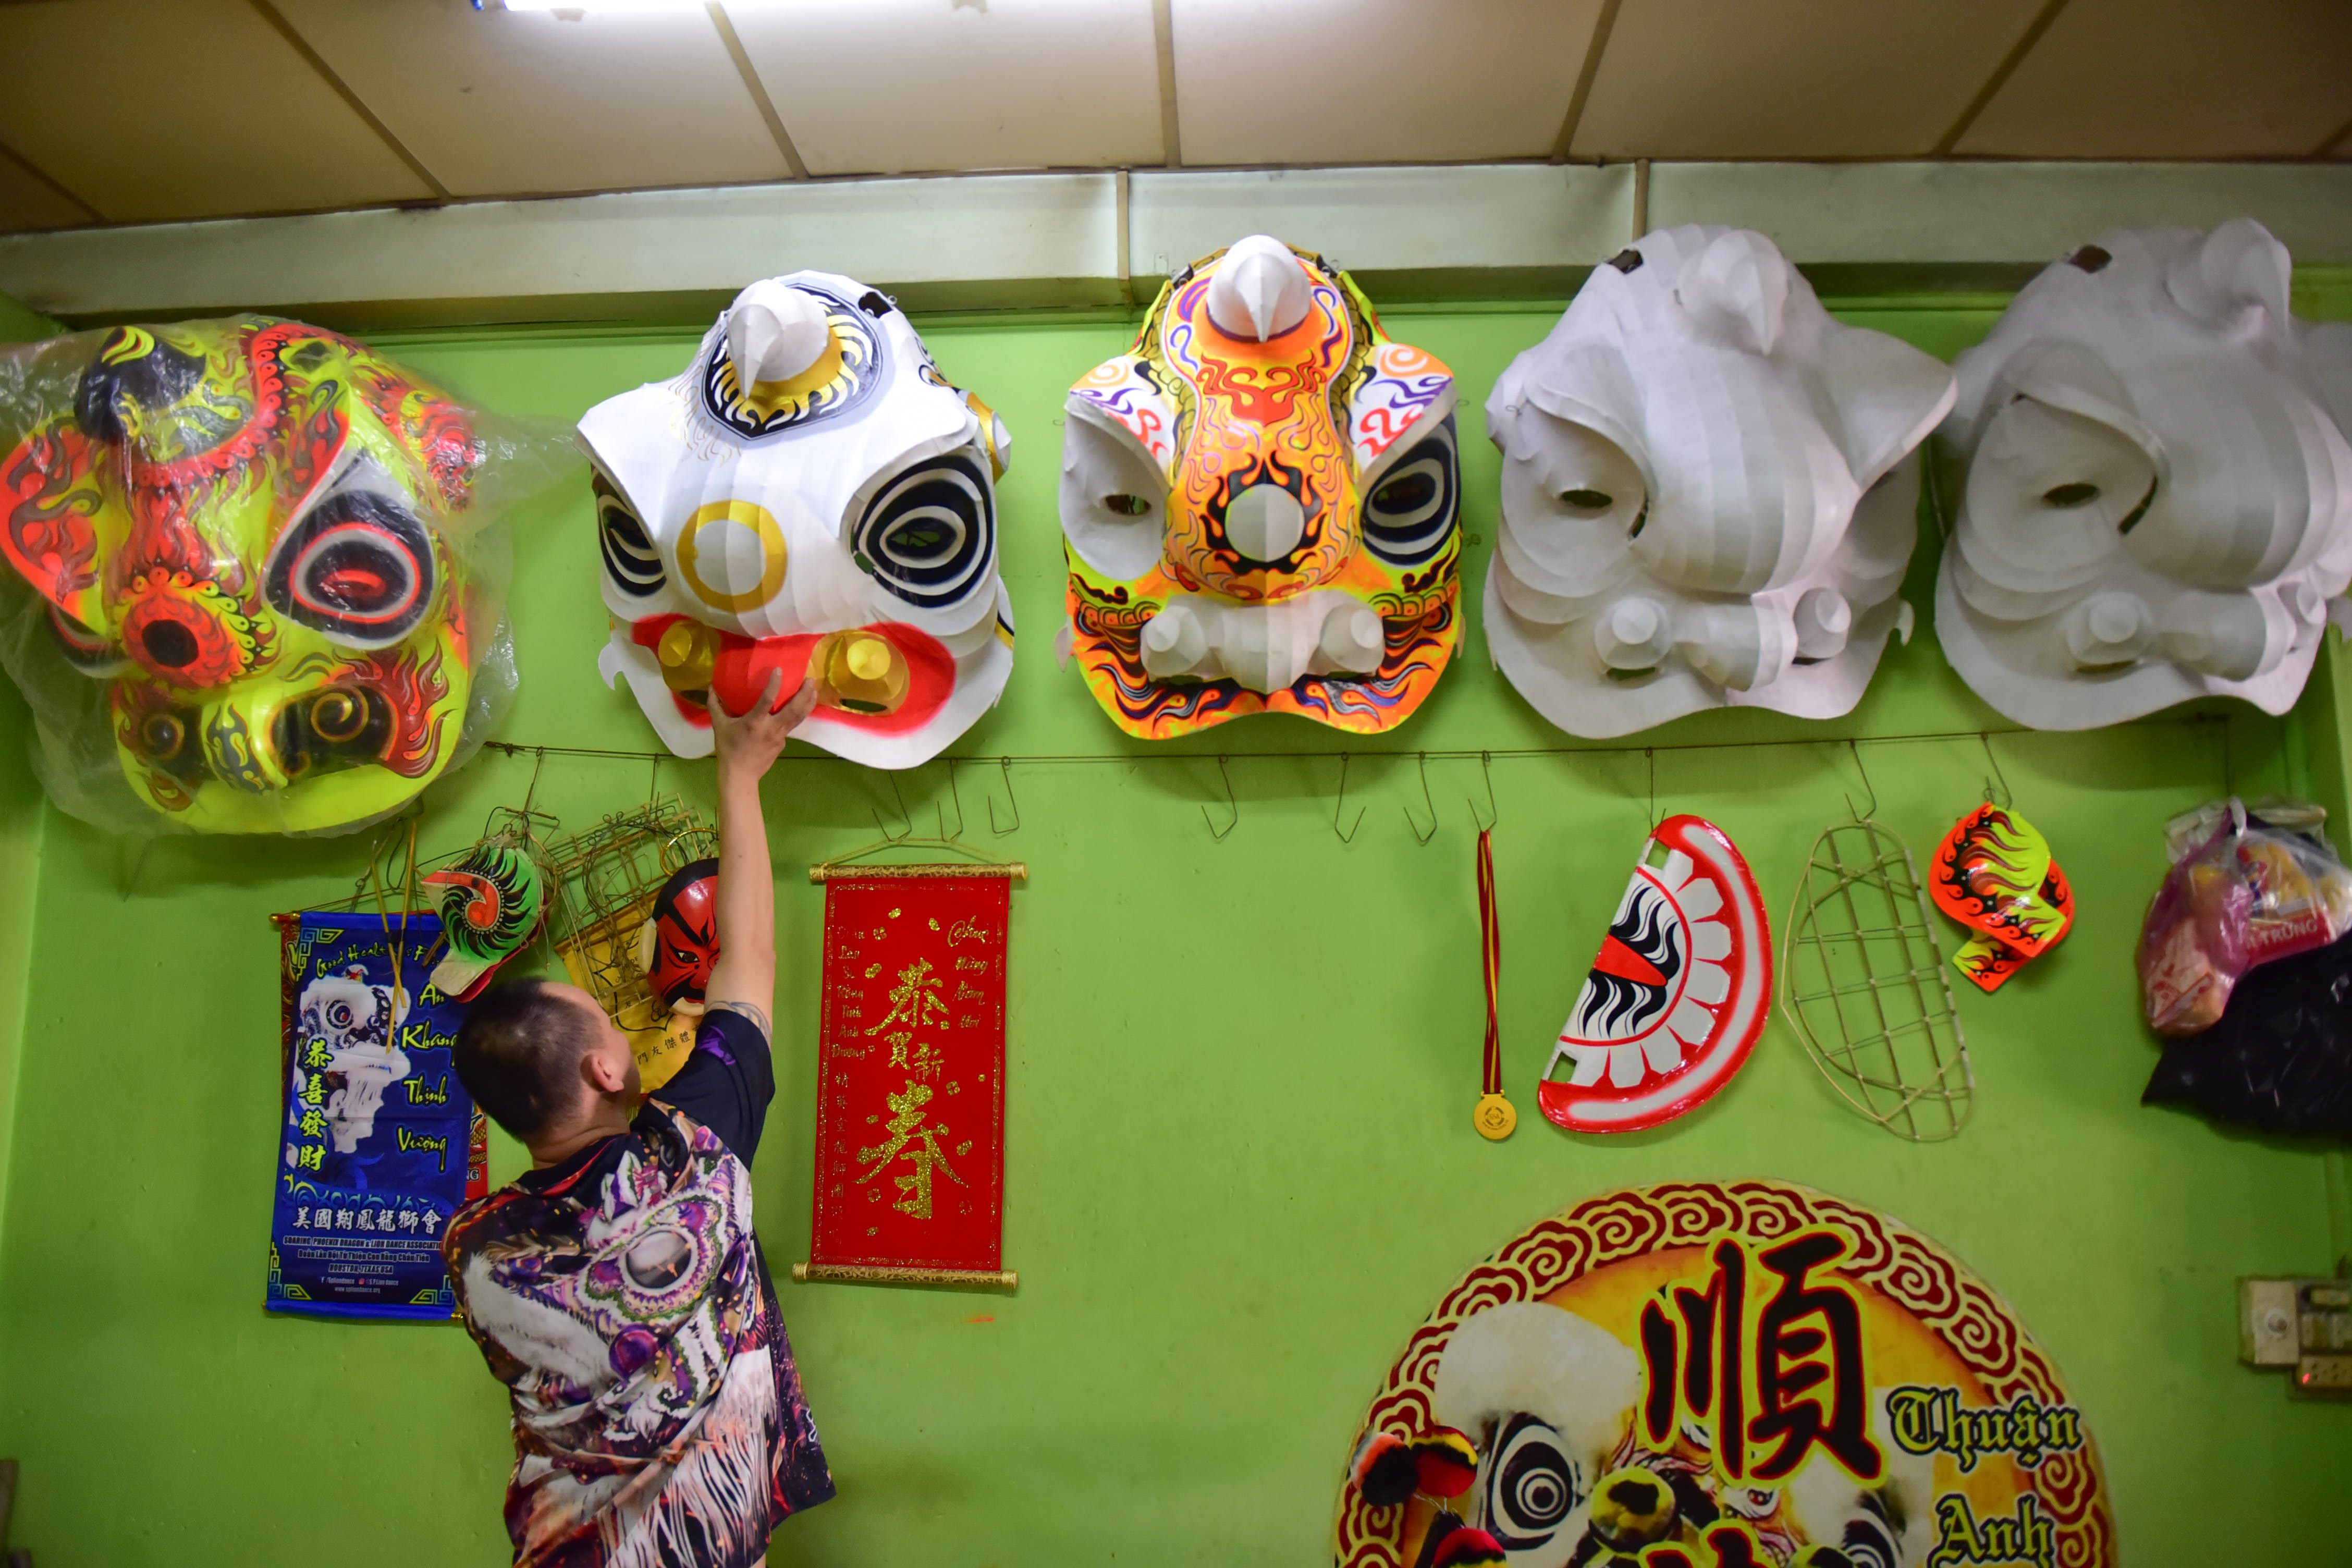 It takes some five to seven days to make a lion head from scratch. Photo: Ngoc Phuong / Tuoi Tre News